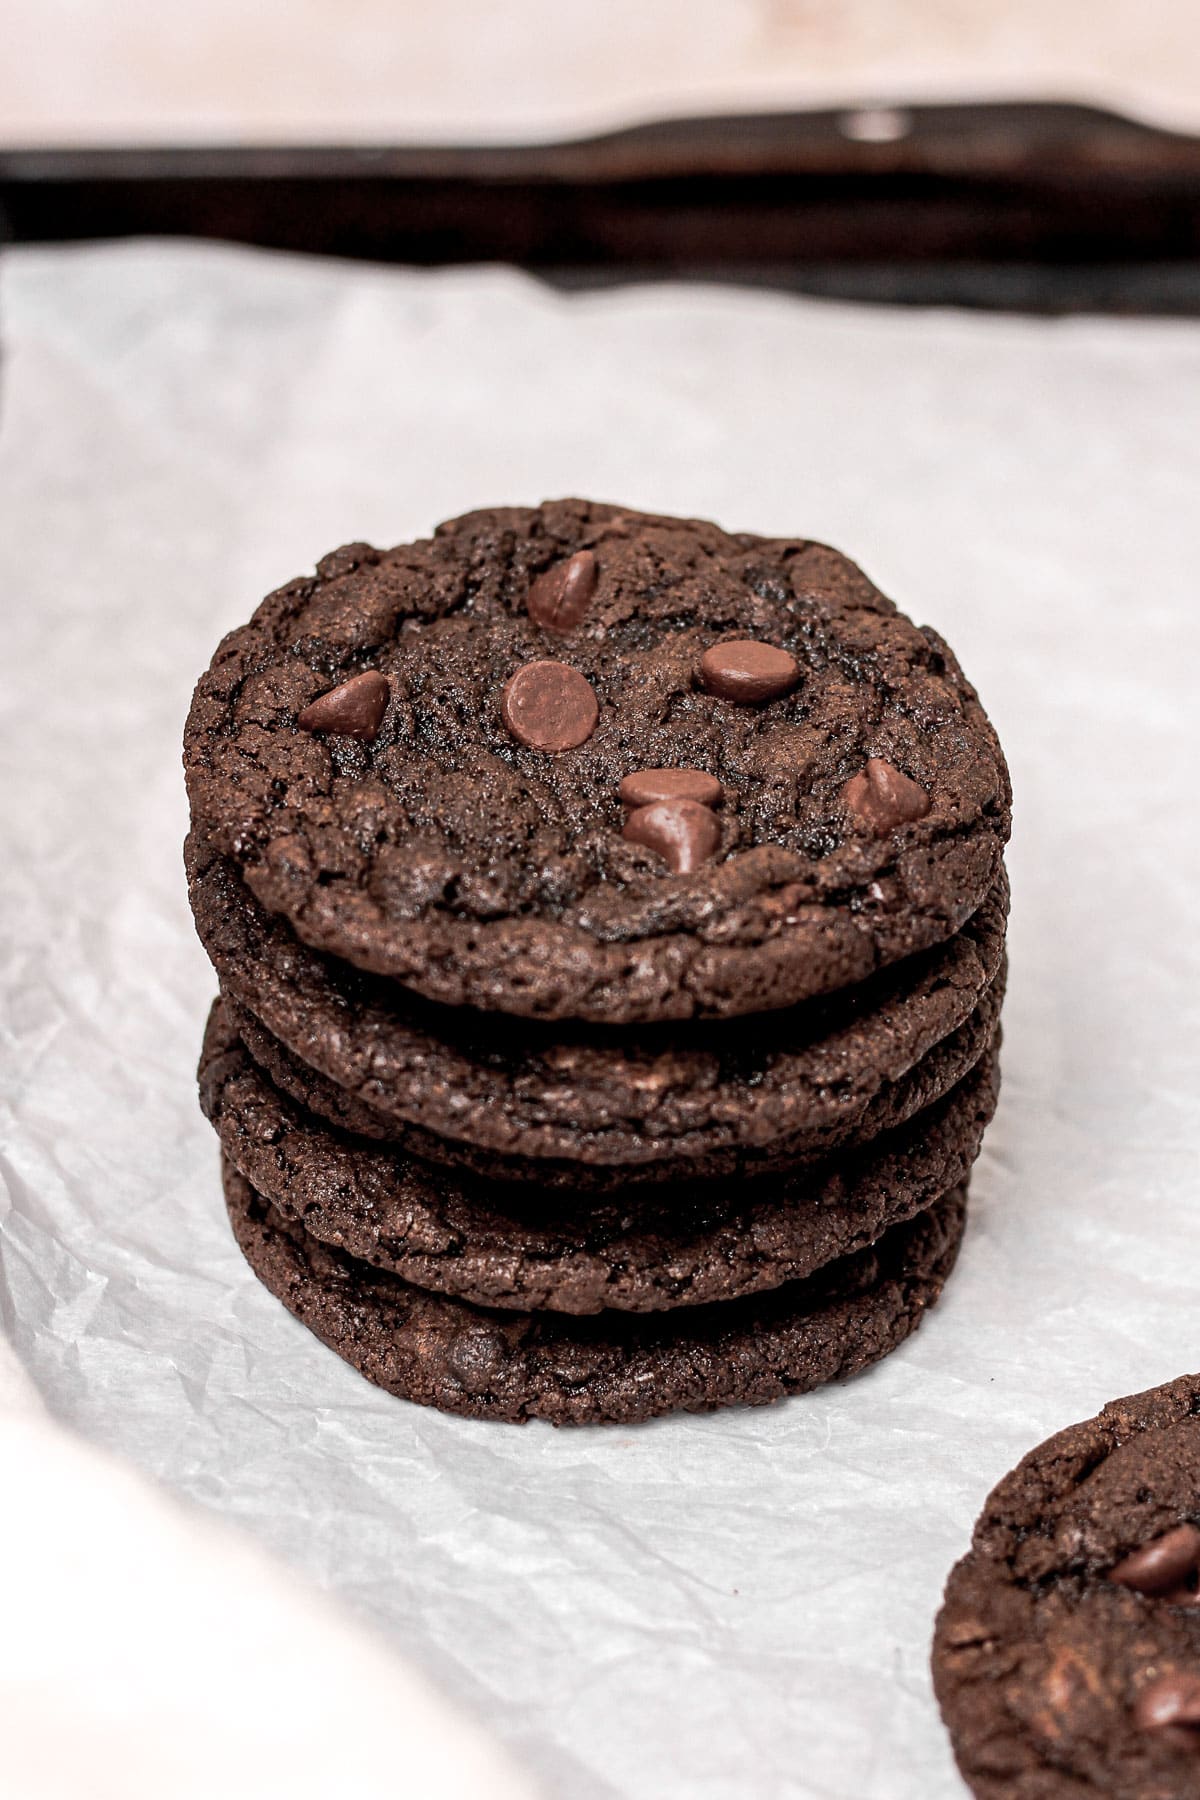 A stack of double chocolate chip cookies on a parchment lined baking sheet.